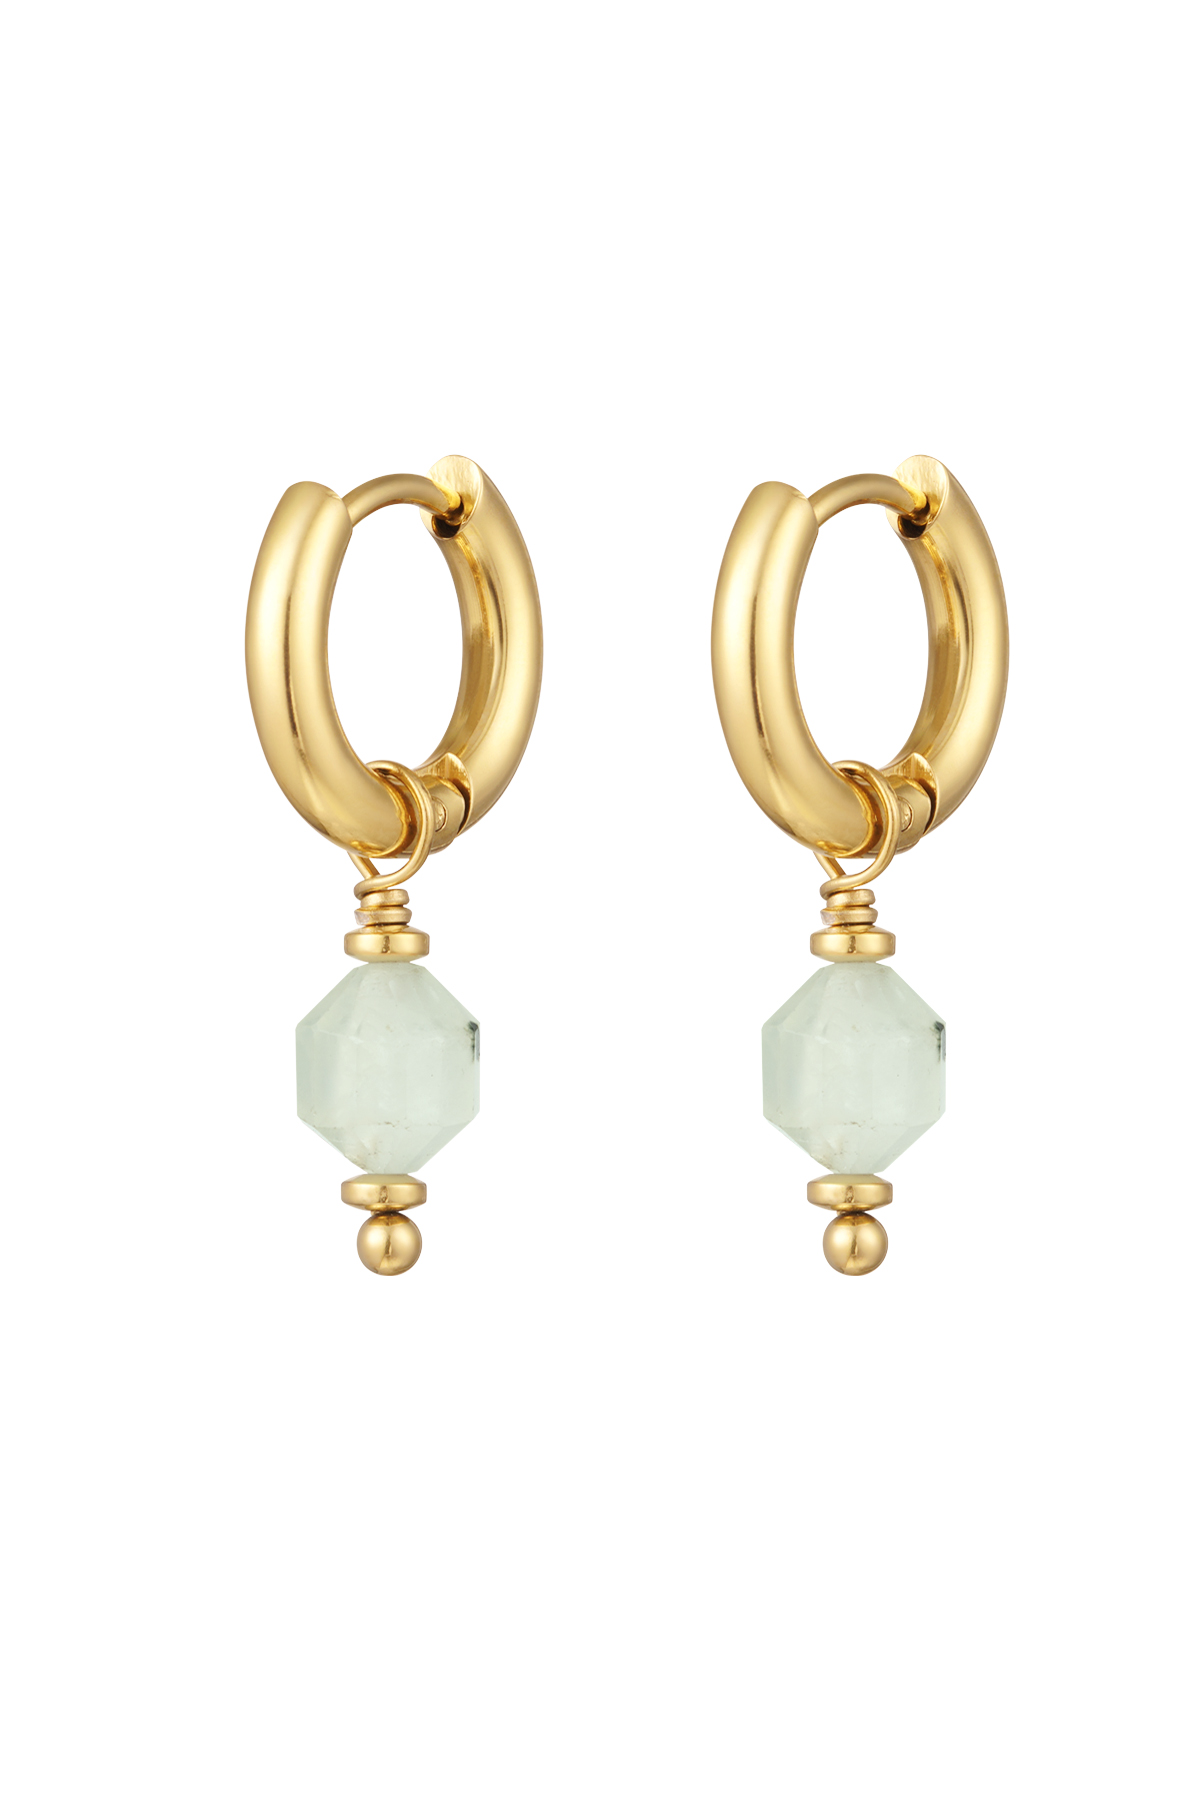 Gold / Earrings with August stone - gold/light green Picture8